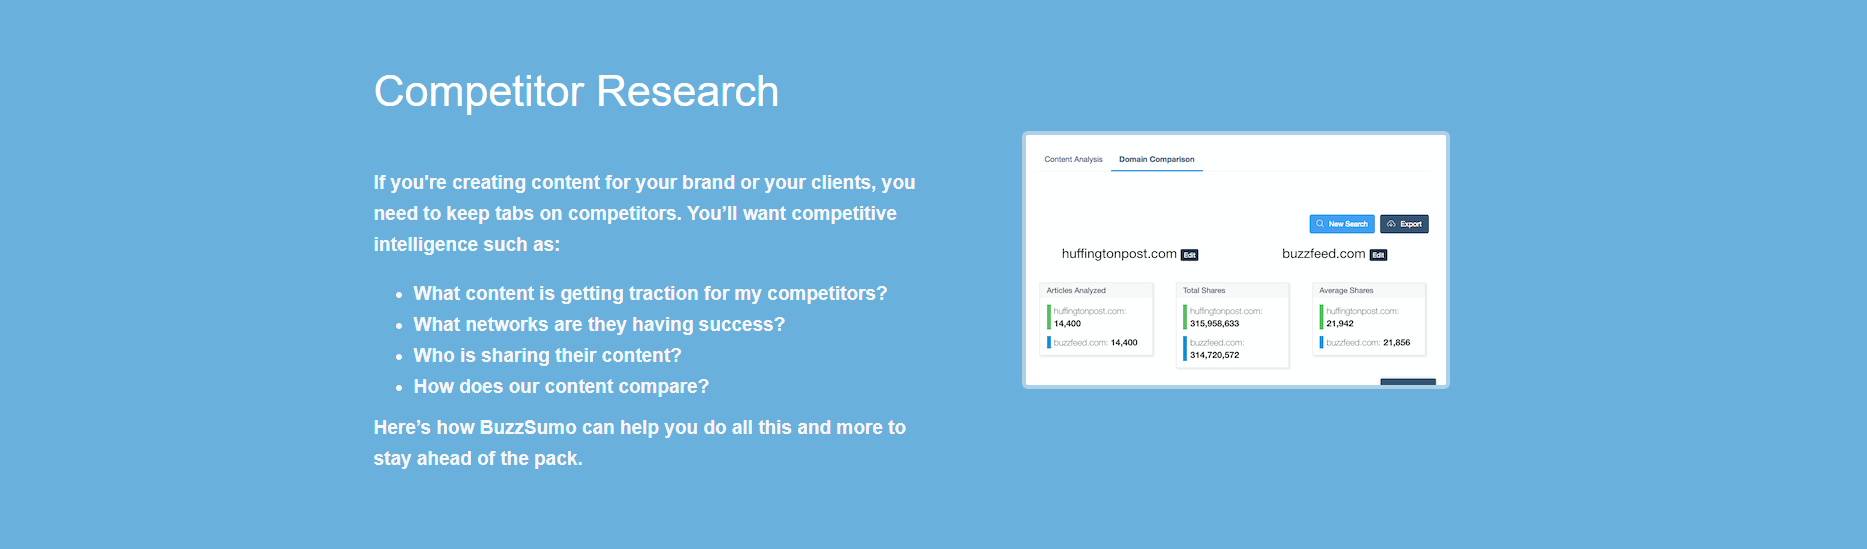 Competitor research